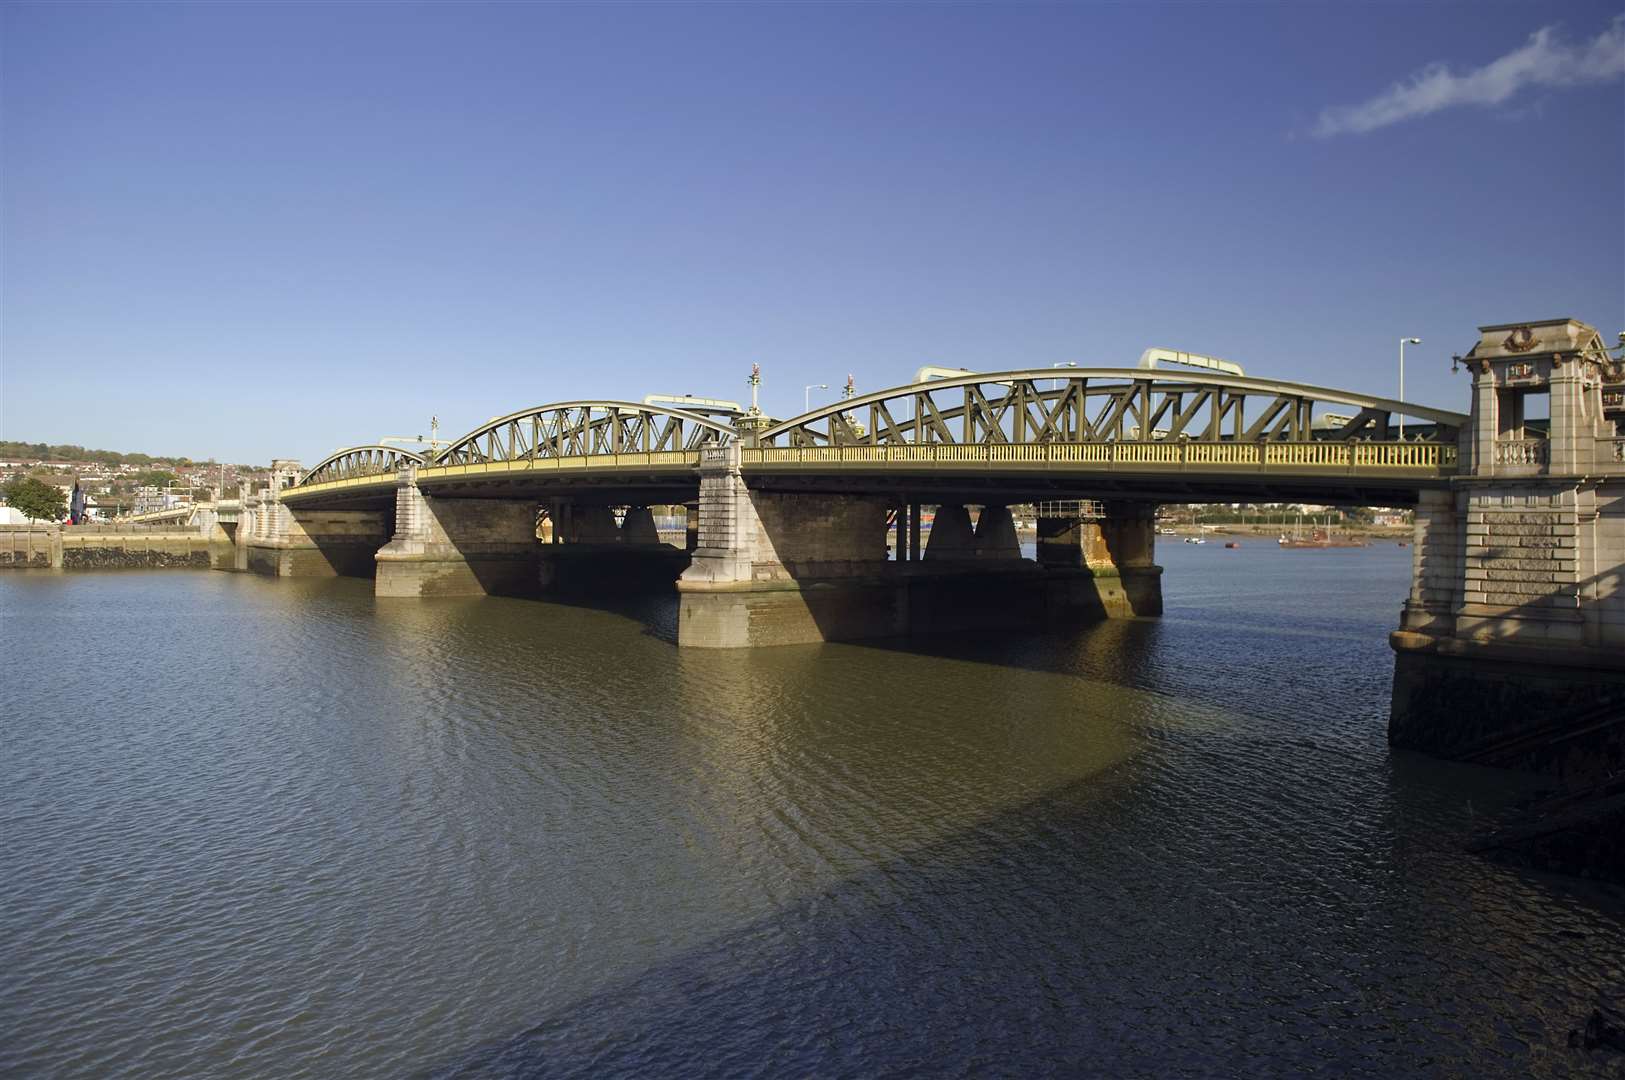 Refurbishment works will be carried out on Rochester Bridge over 18 months